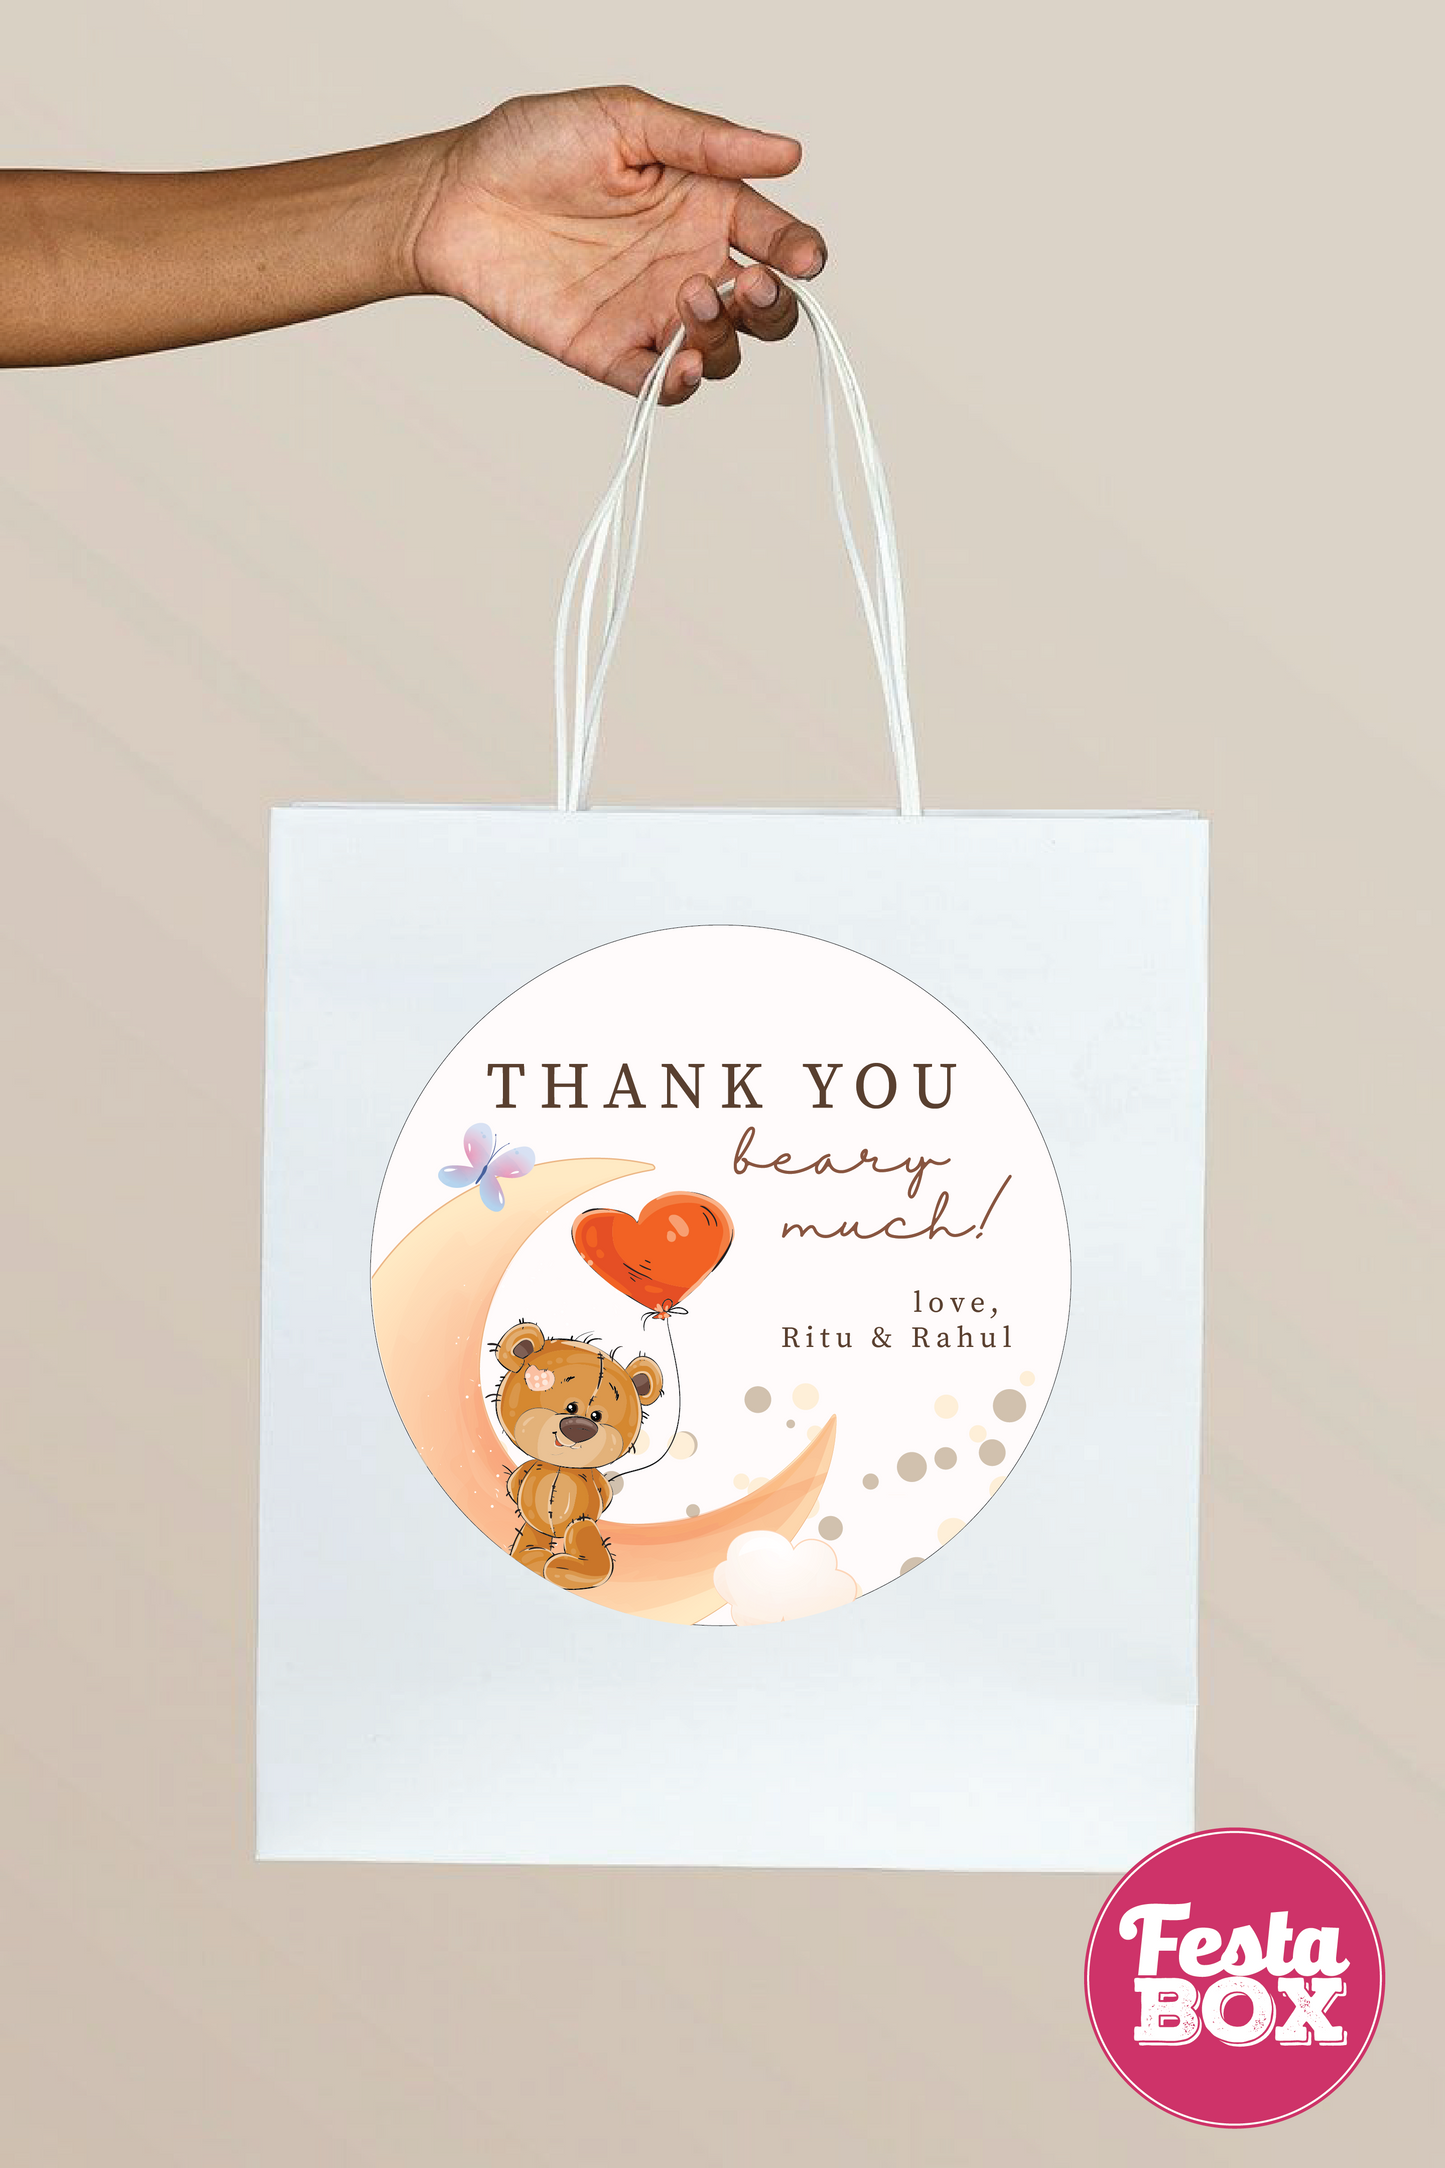 Return Gift Bag under the Teddy Bear Collection by Festabox for Baby Shower